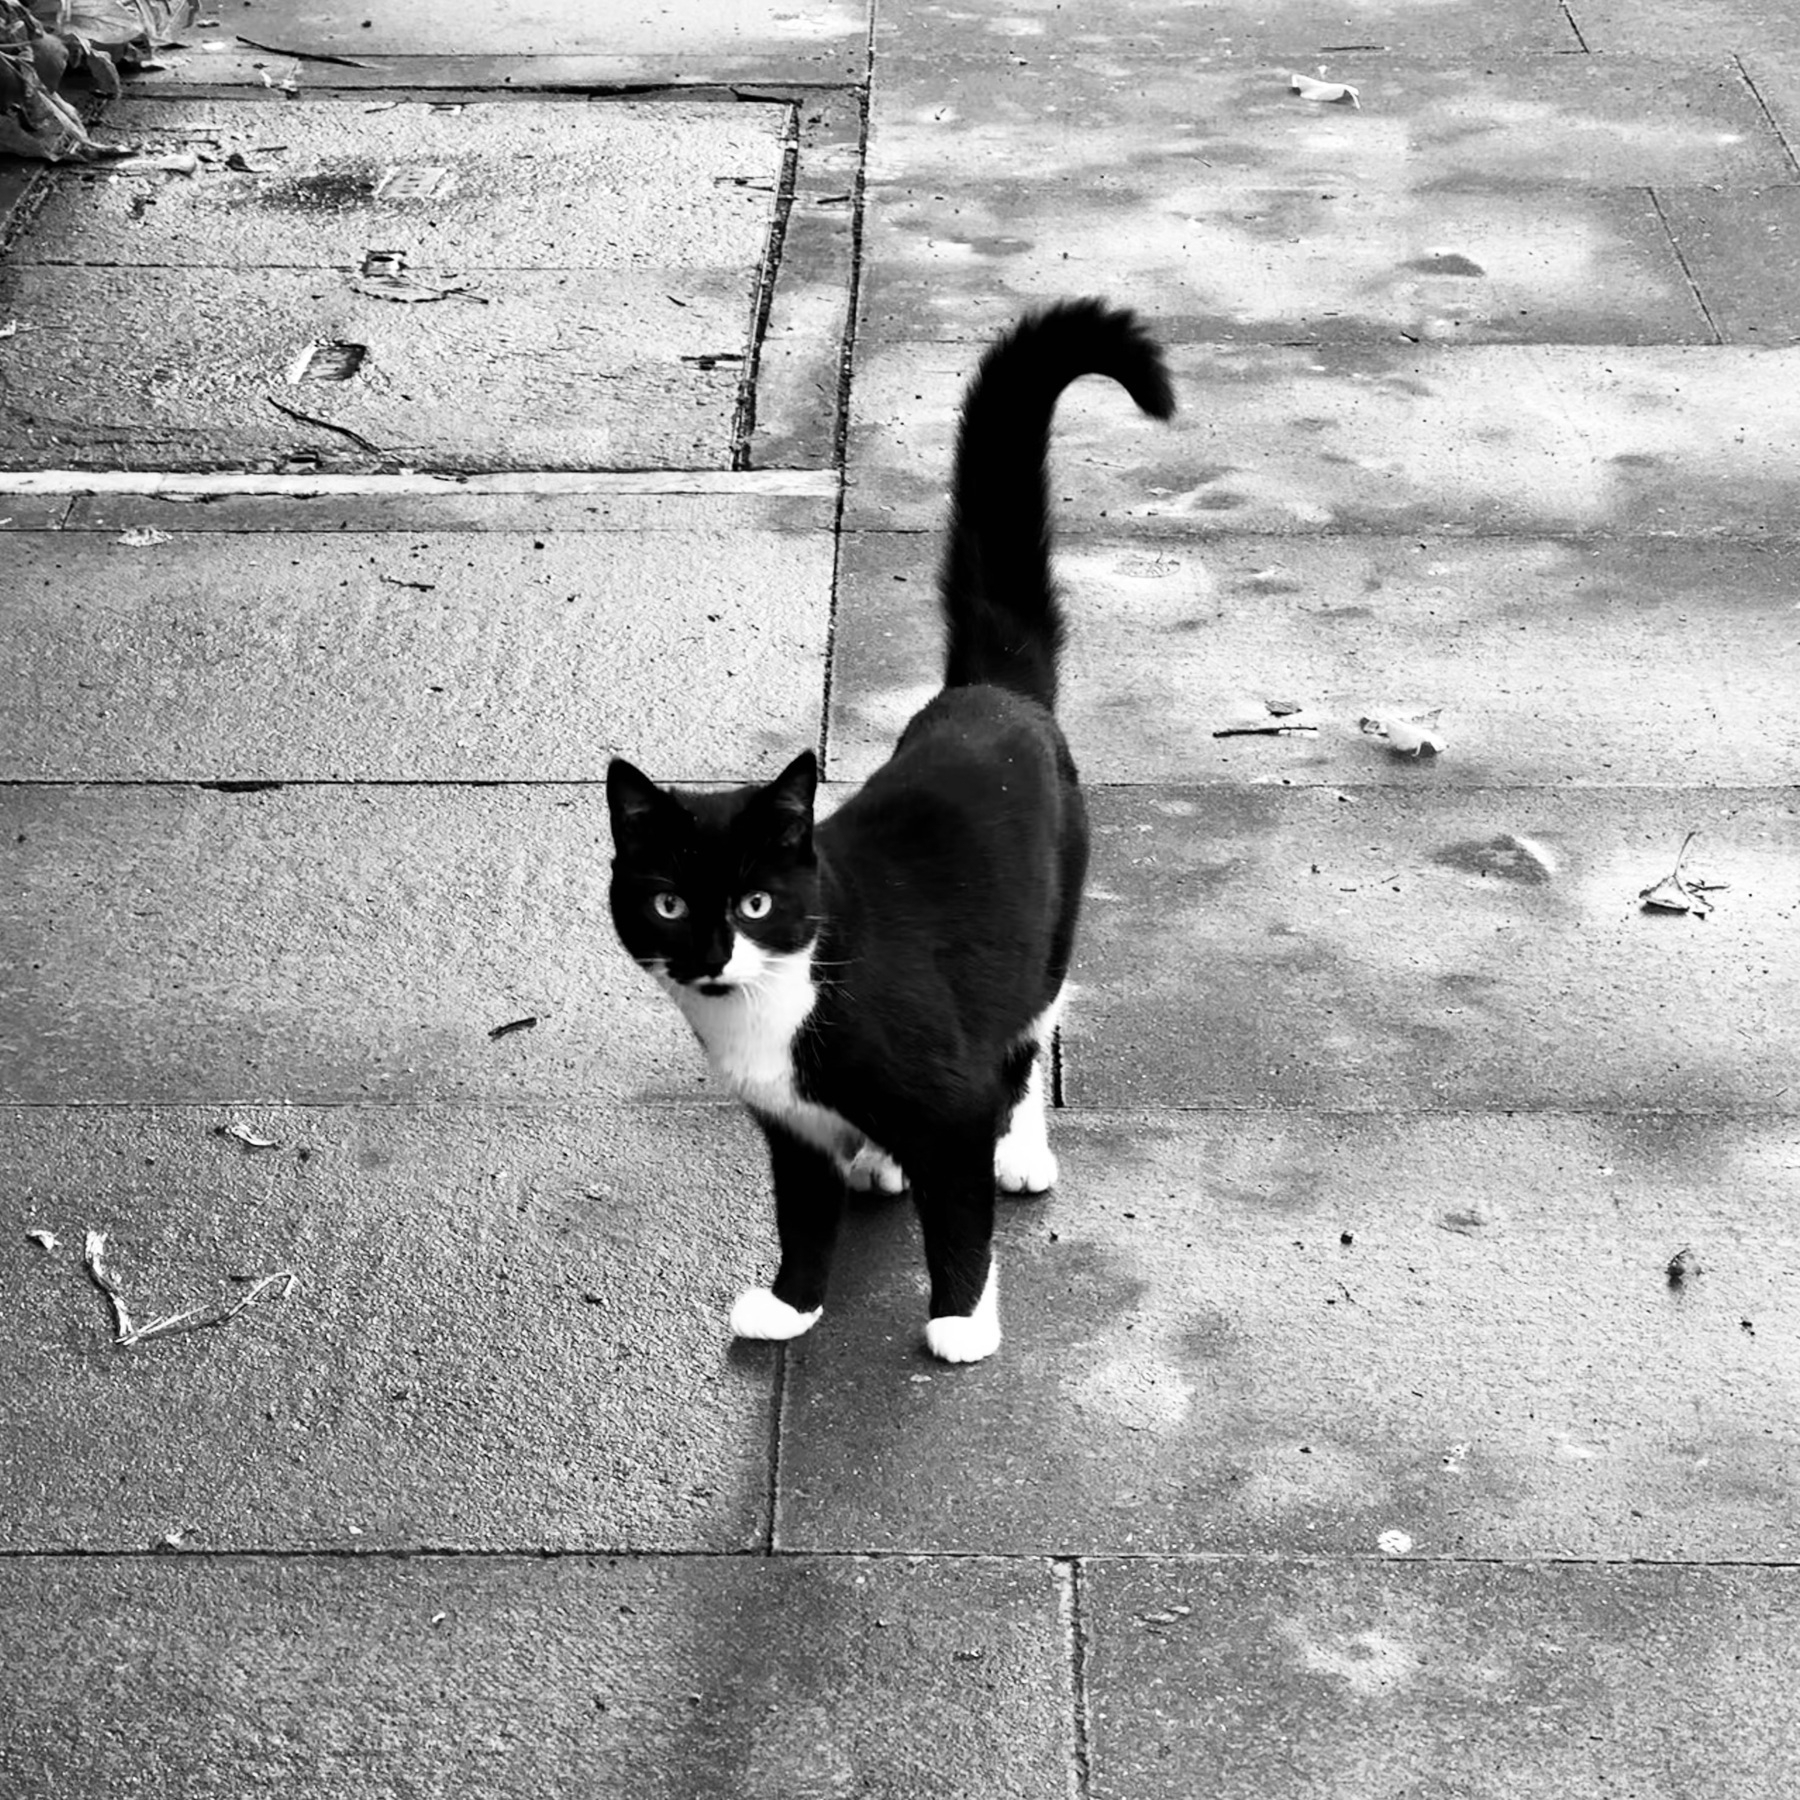 A black and white cat standing in the middle of a damp pavement. Its tail is upright, with just the top curled over.